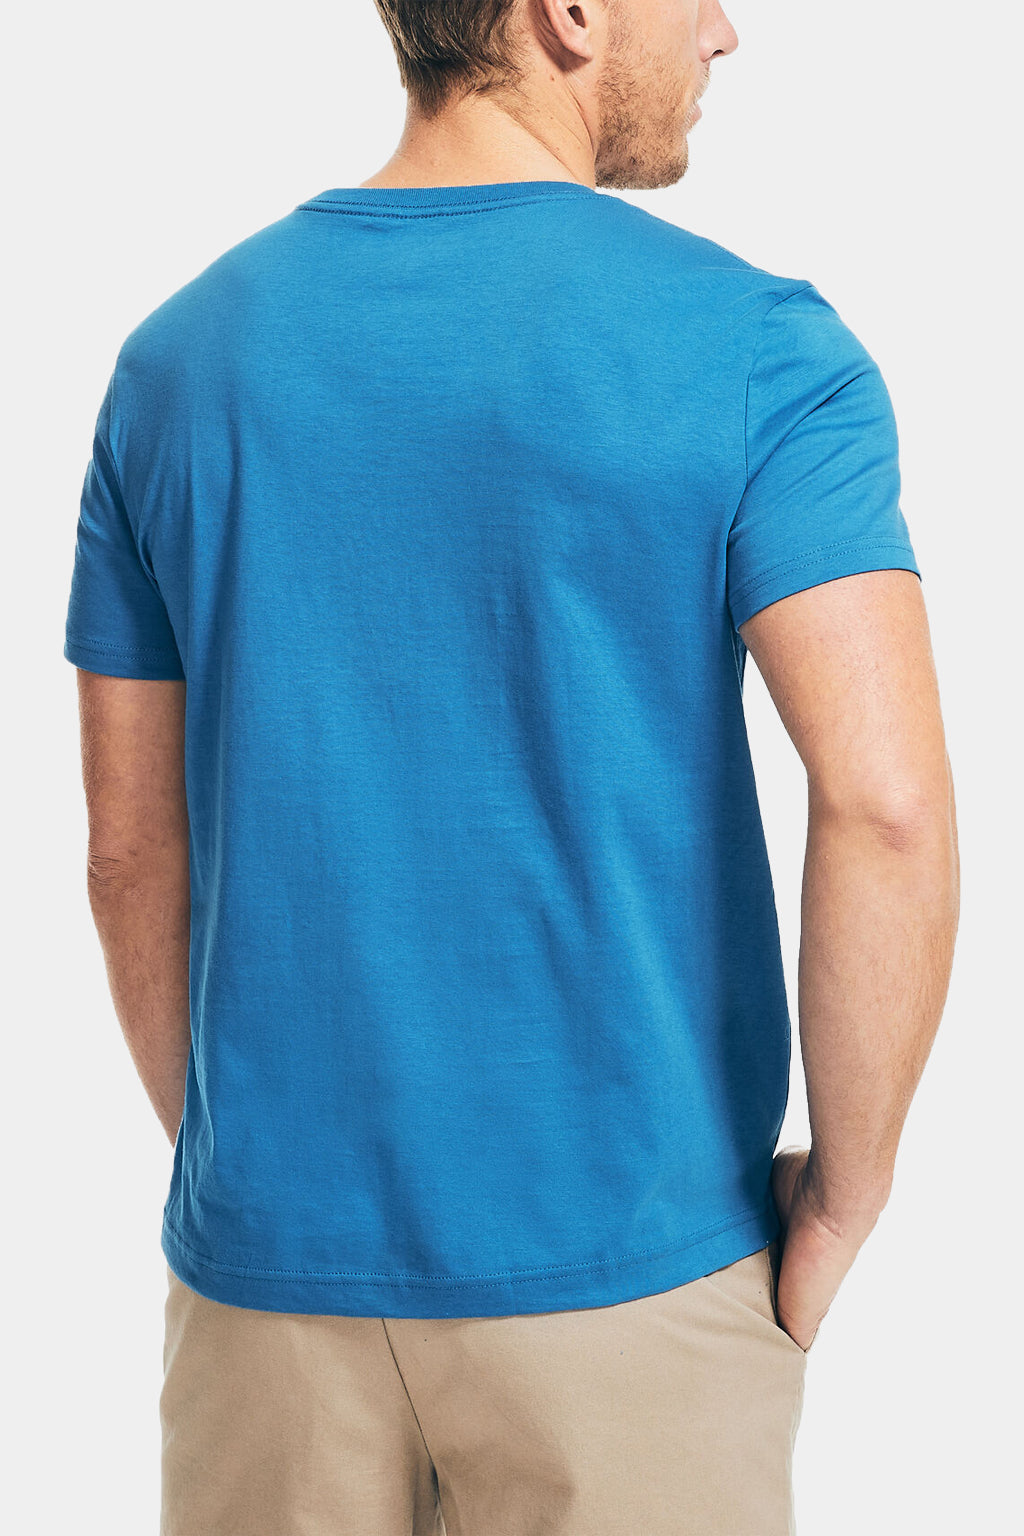 Solid Short Sleeve Round neck Tee T-Shirt